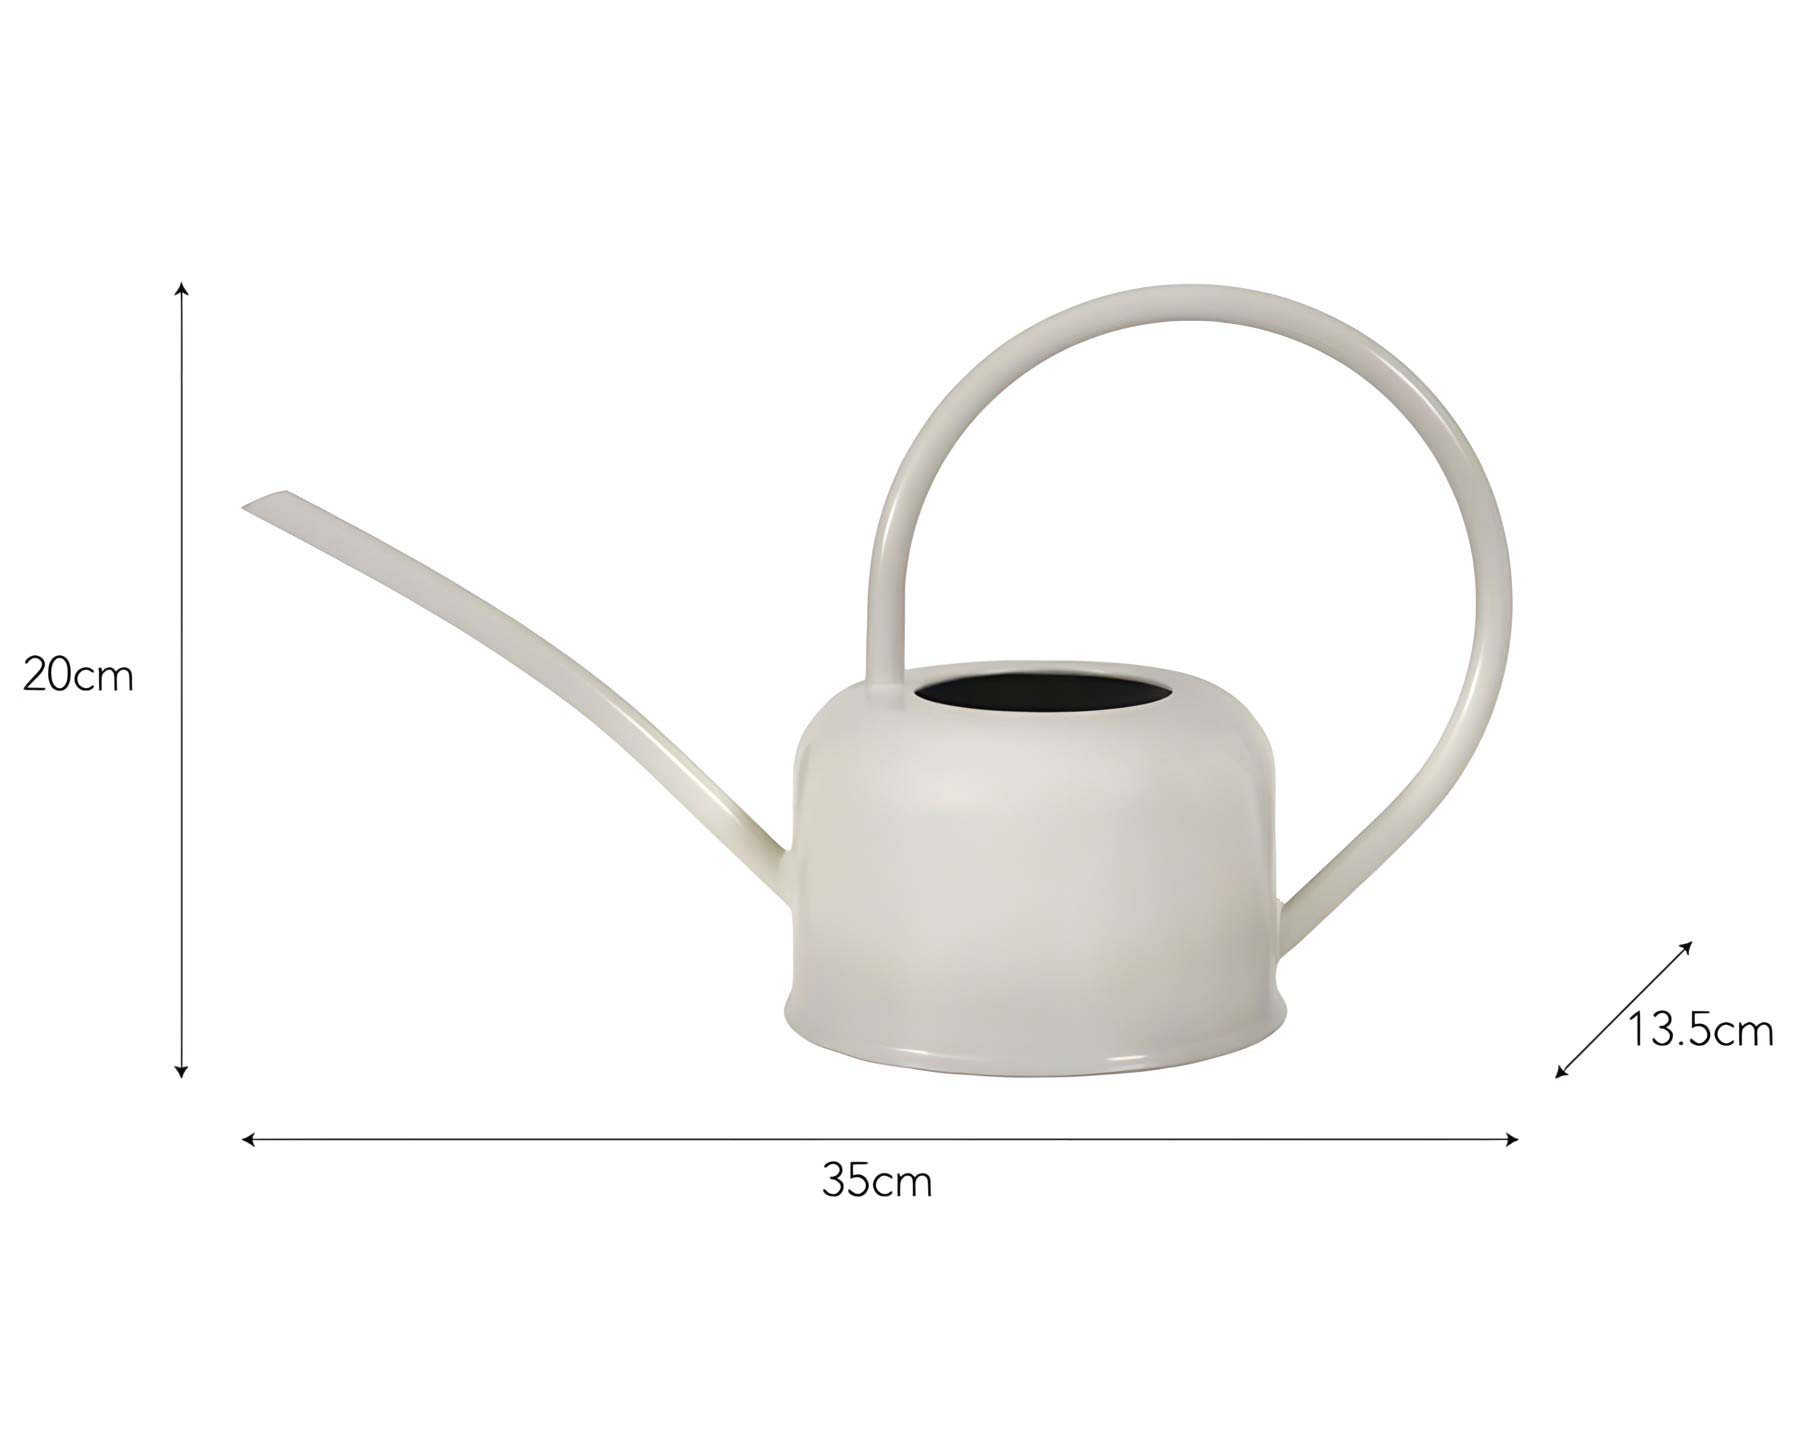 Indoor watering can 1.1 litre capacity - Chalk colour finish